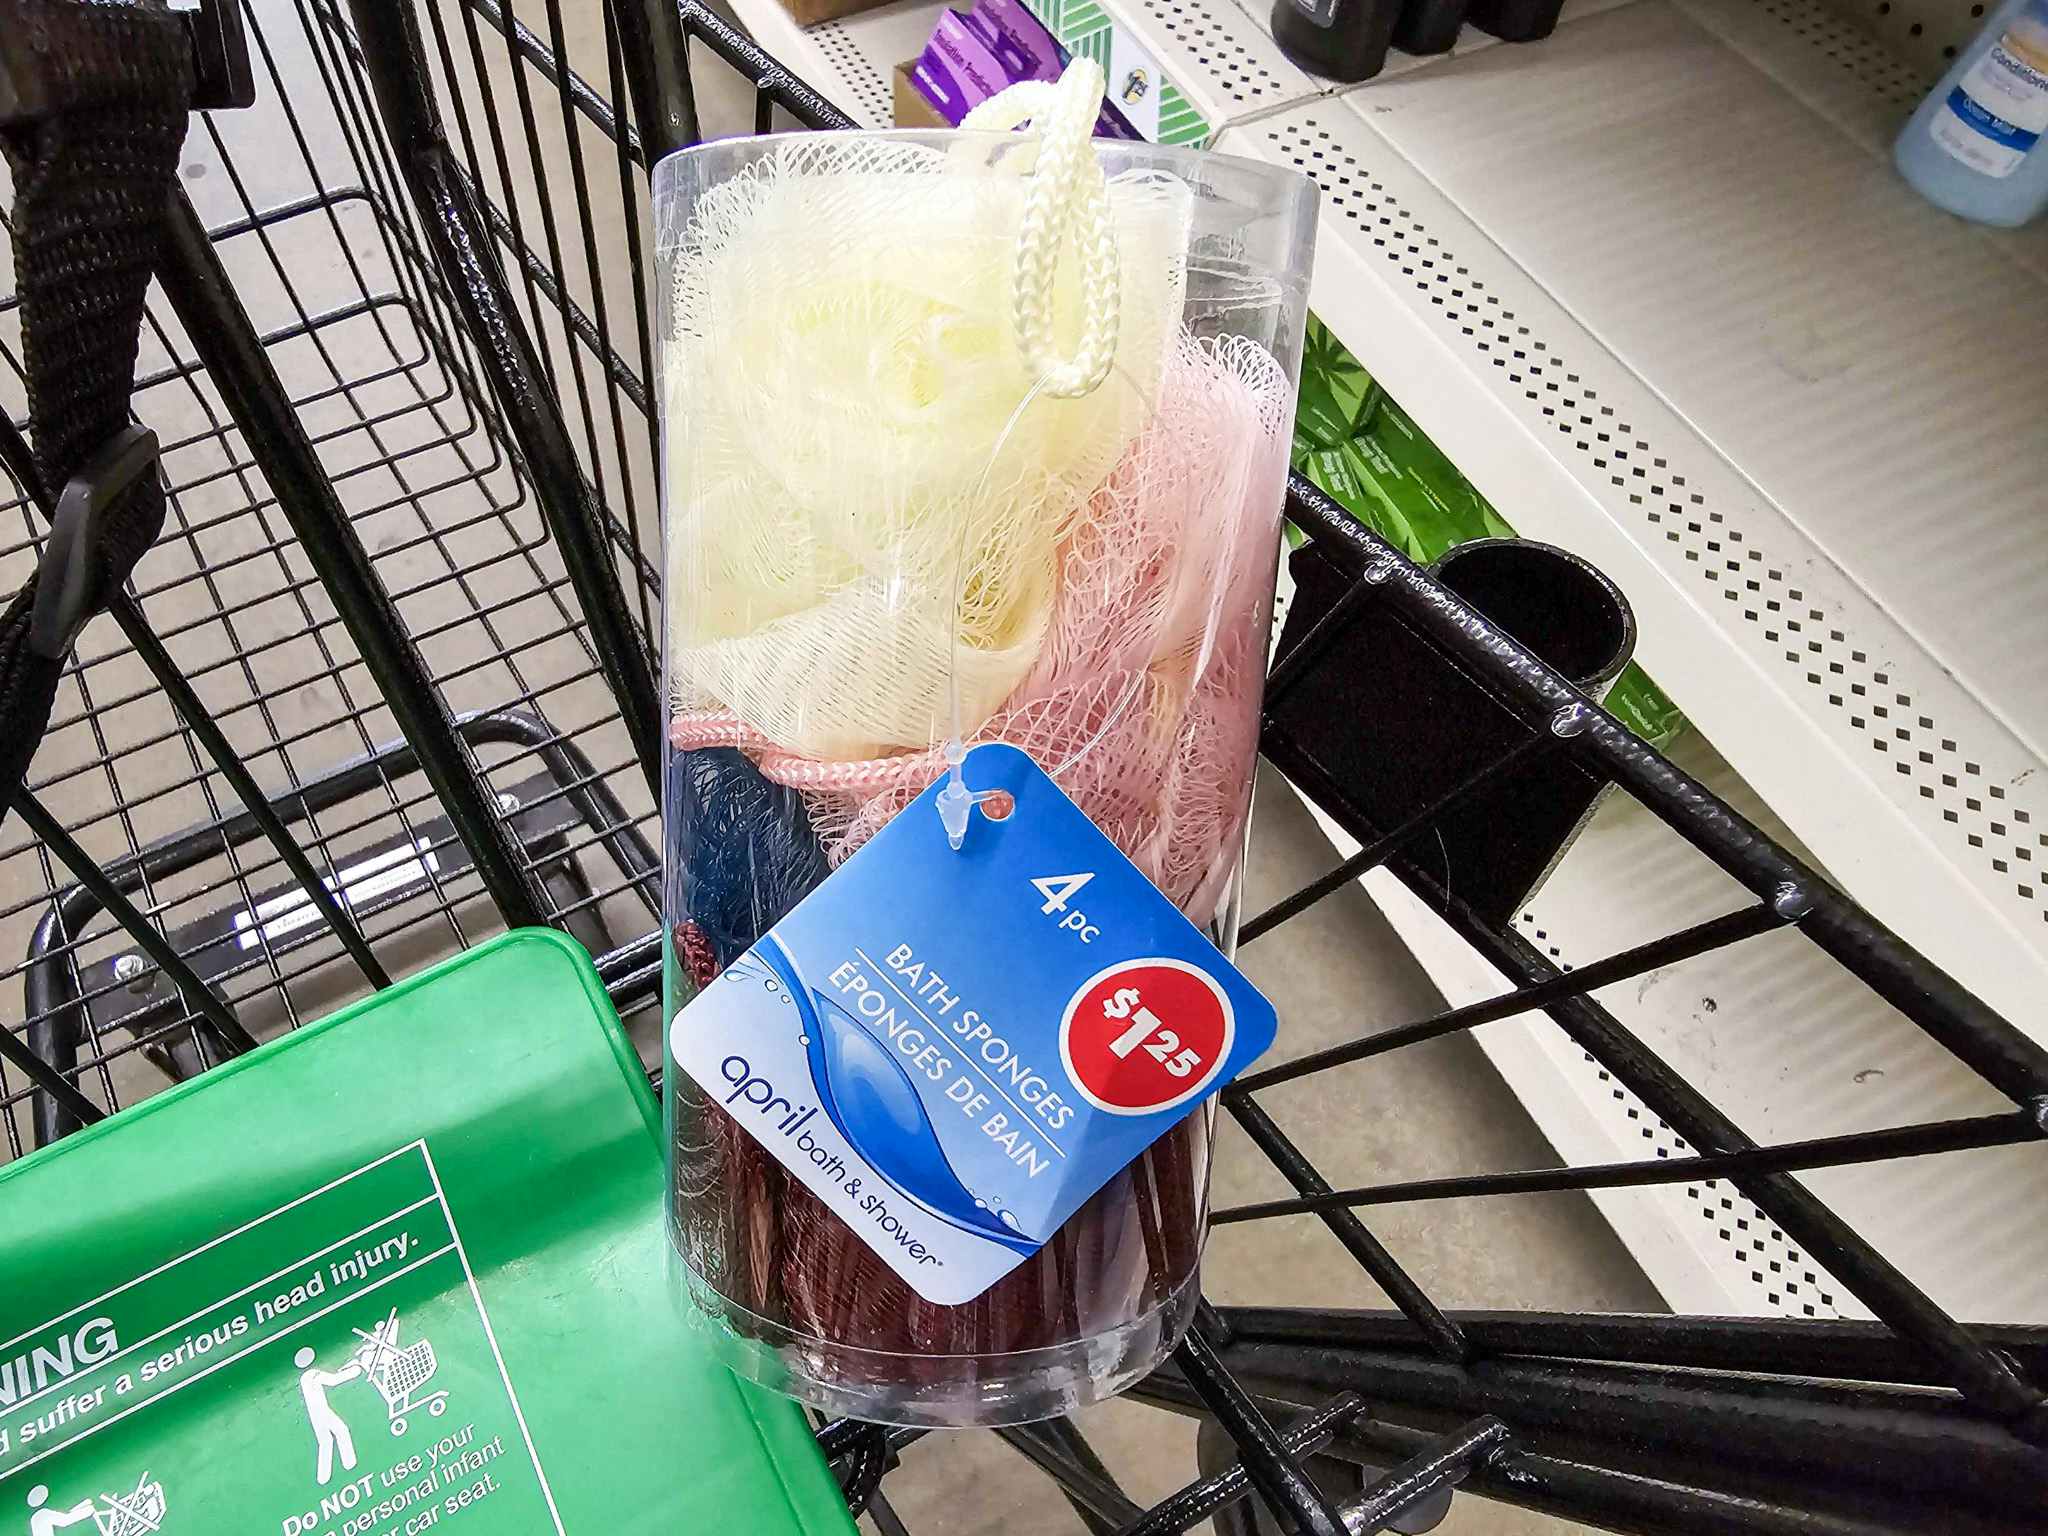 4-pack of bath sponges in a cart